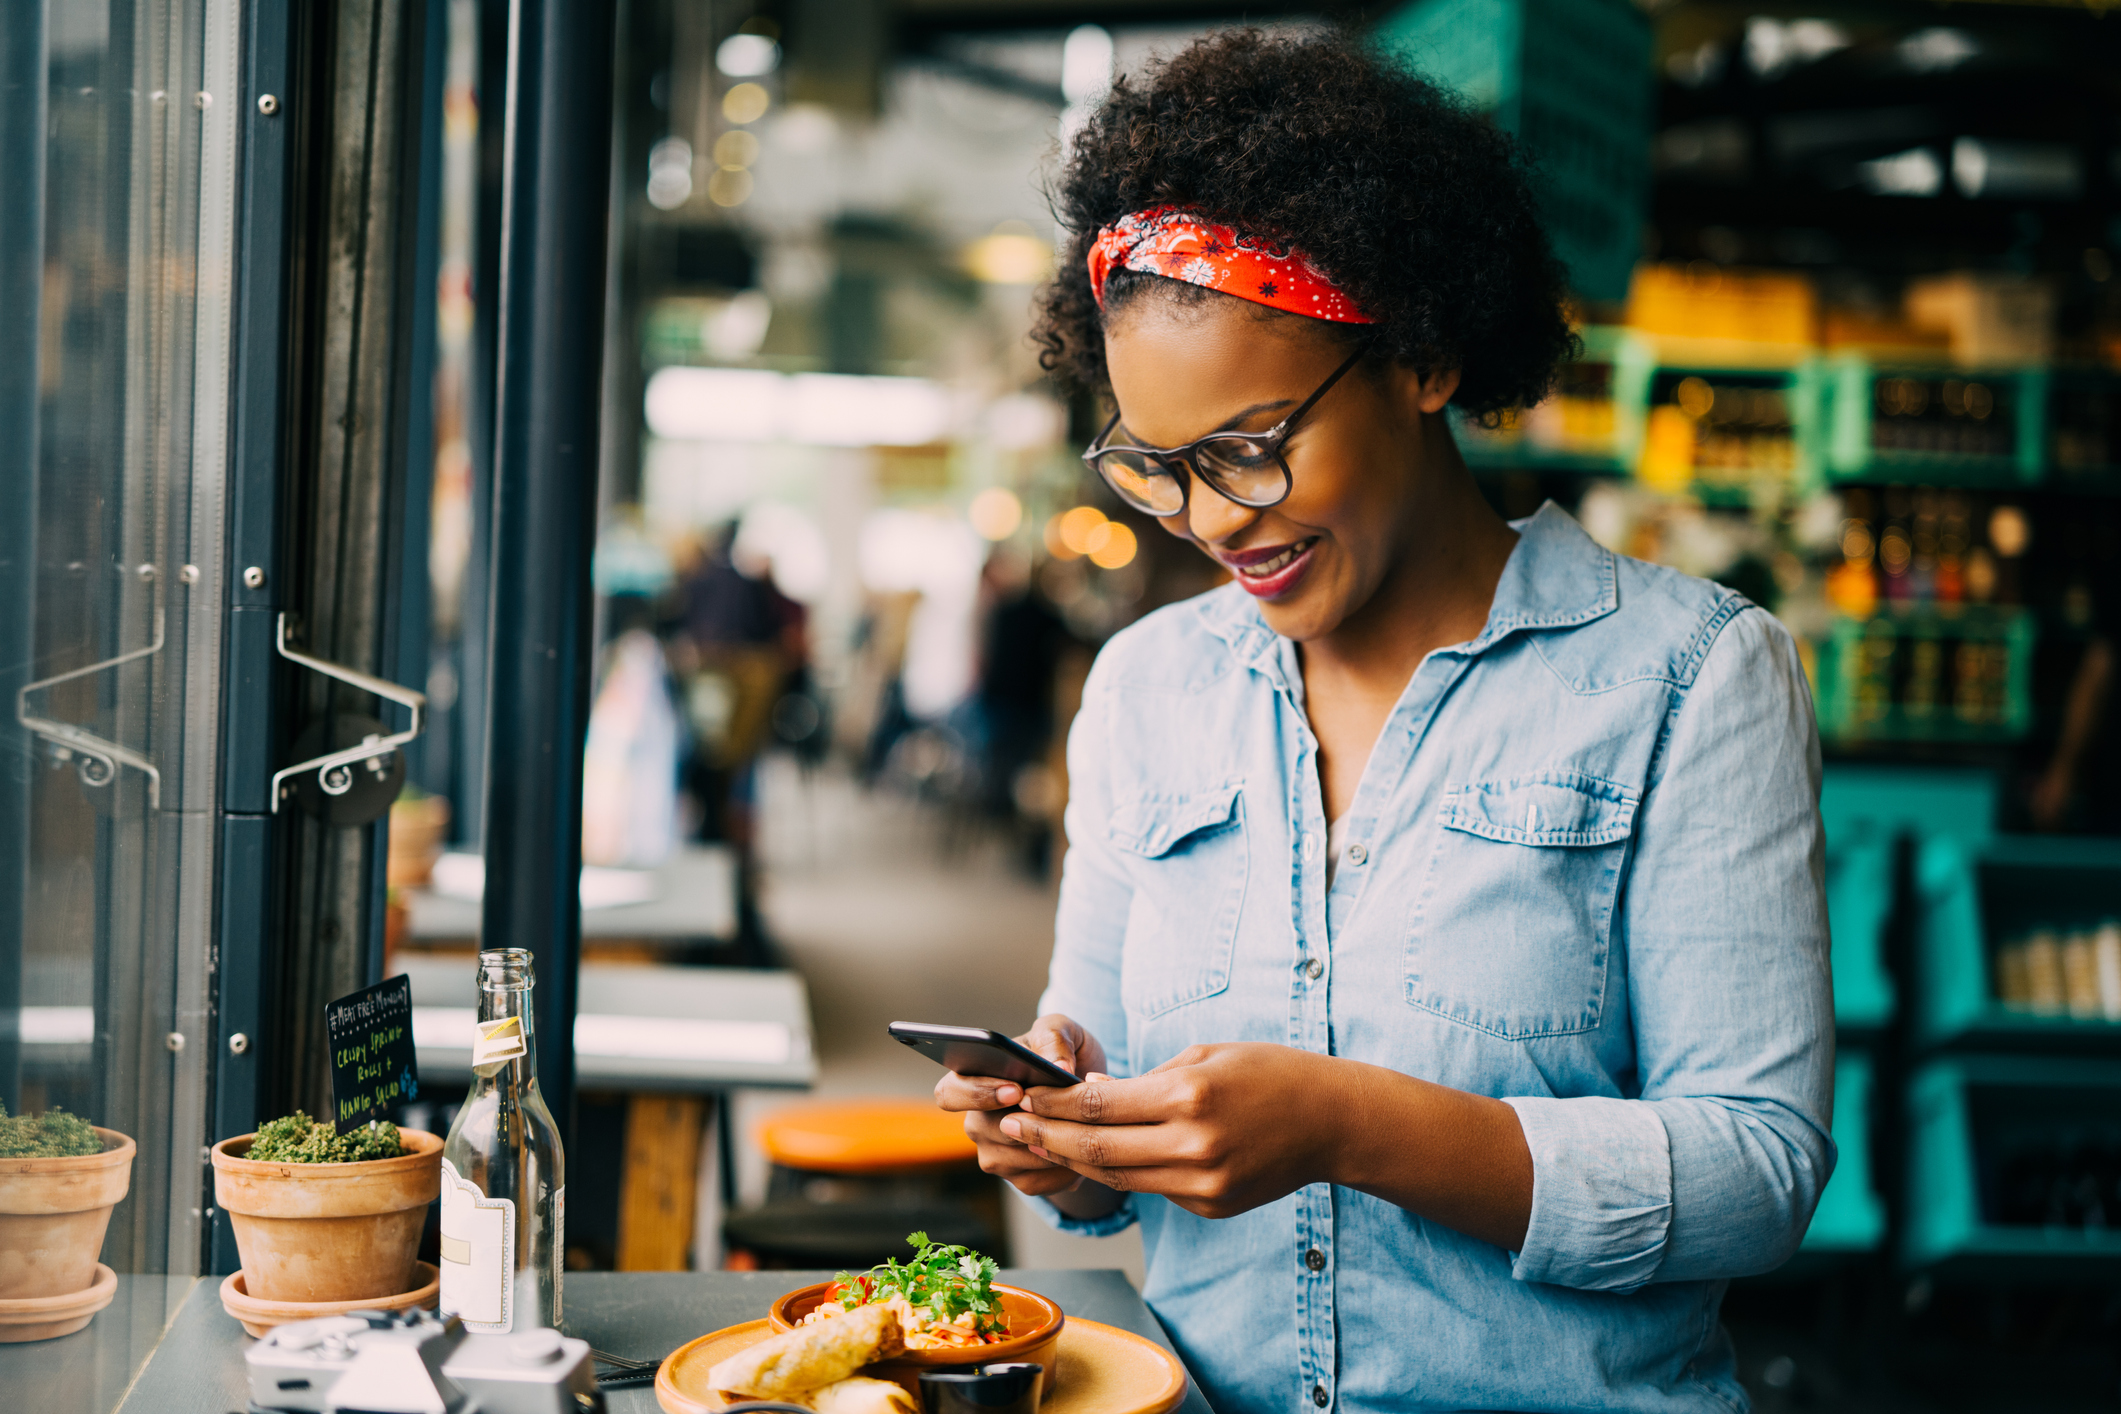 Black female food blogger taking a photo in a cafe wearing a light blue shirt and red hair bandana